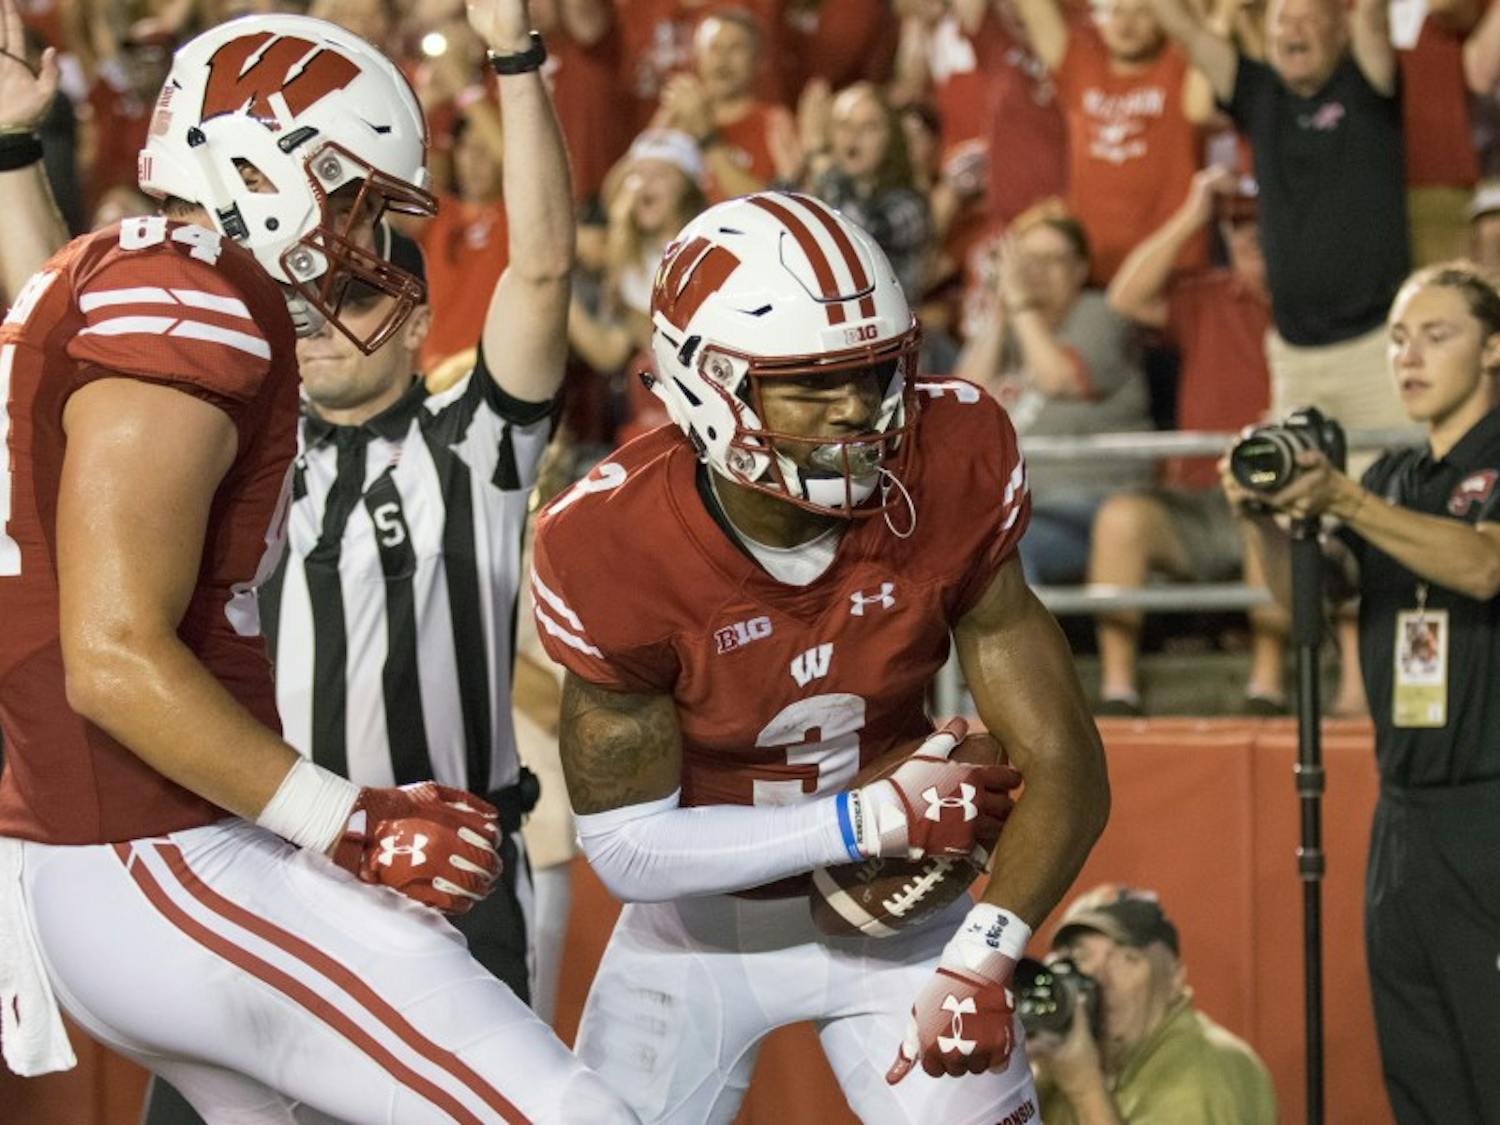 Tight end Jake Ferguson (left) celebrates with receiver Kendric Pryor after Pryor's touchdown grab put the Badgers up 24-0 at the close of the second quarter.